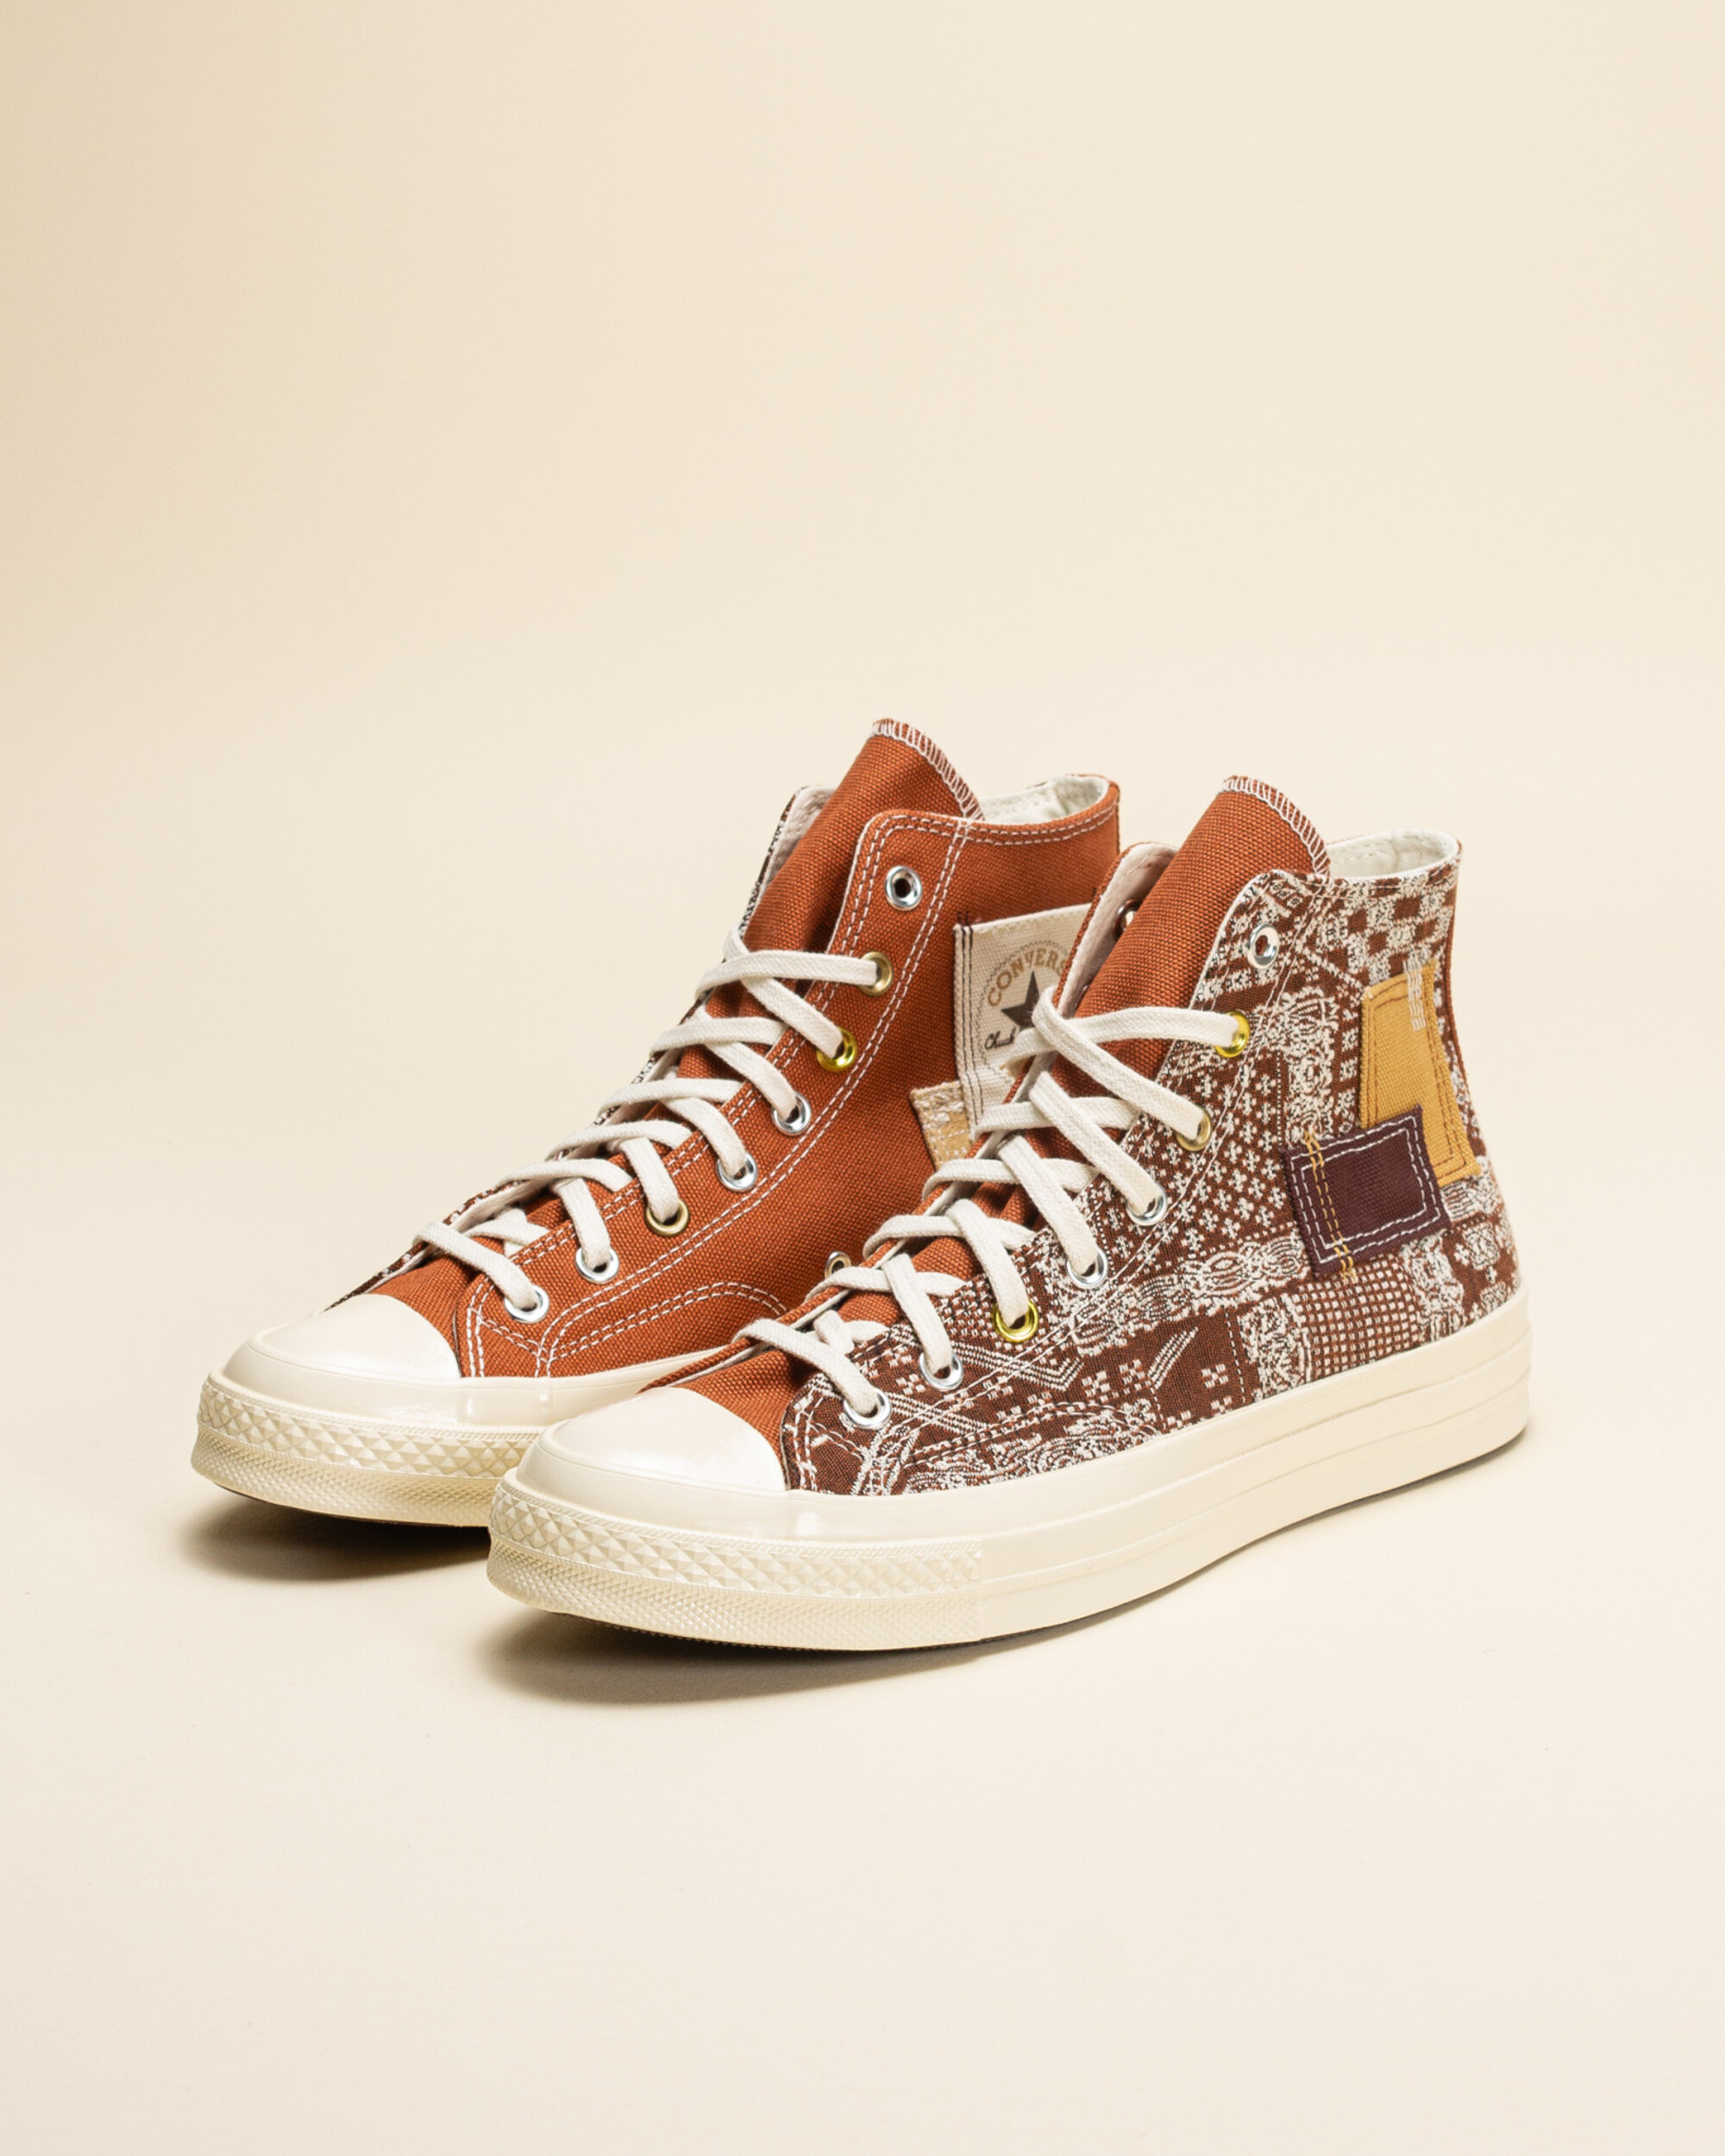 Converse Chuck 70 Patchwork - Tawny owl/Egret/Eternal Earth Brown